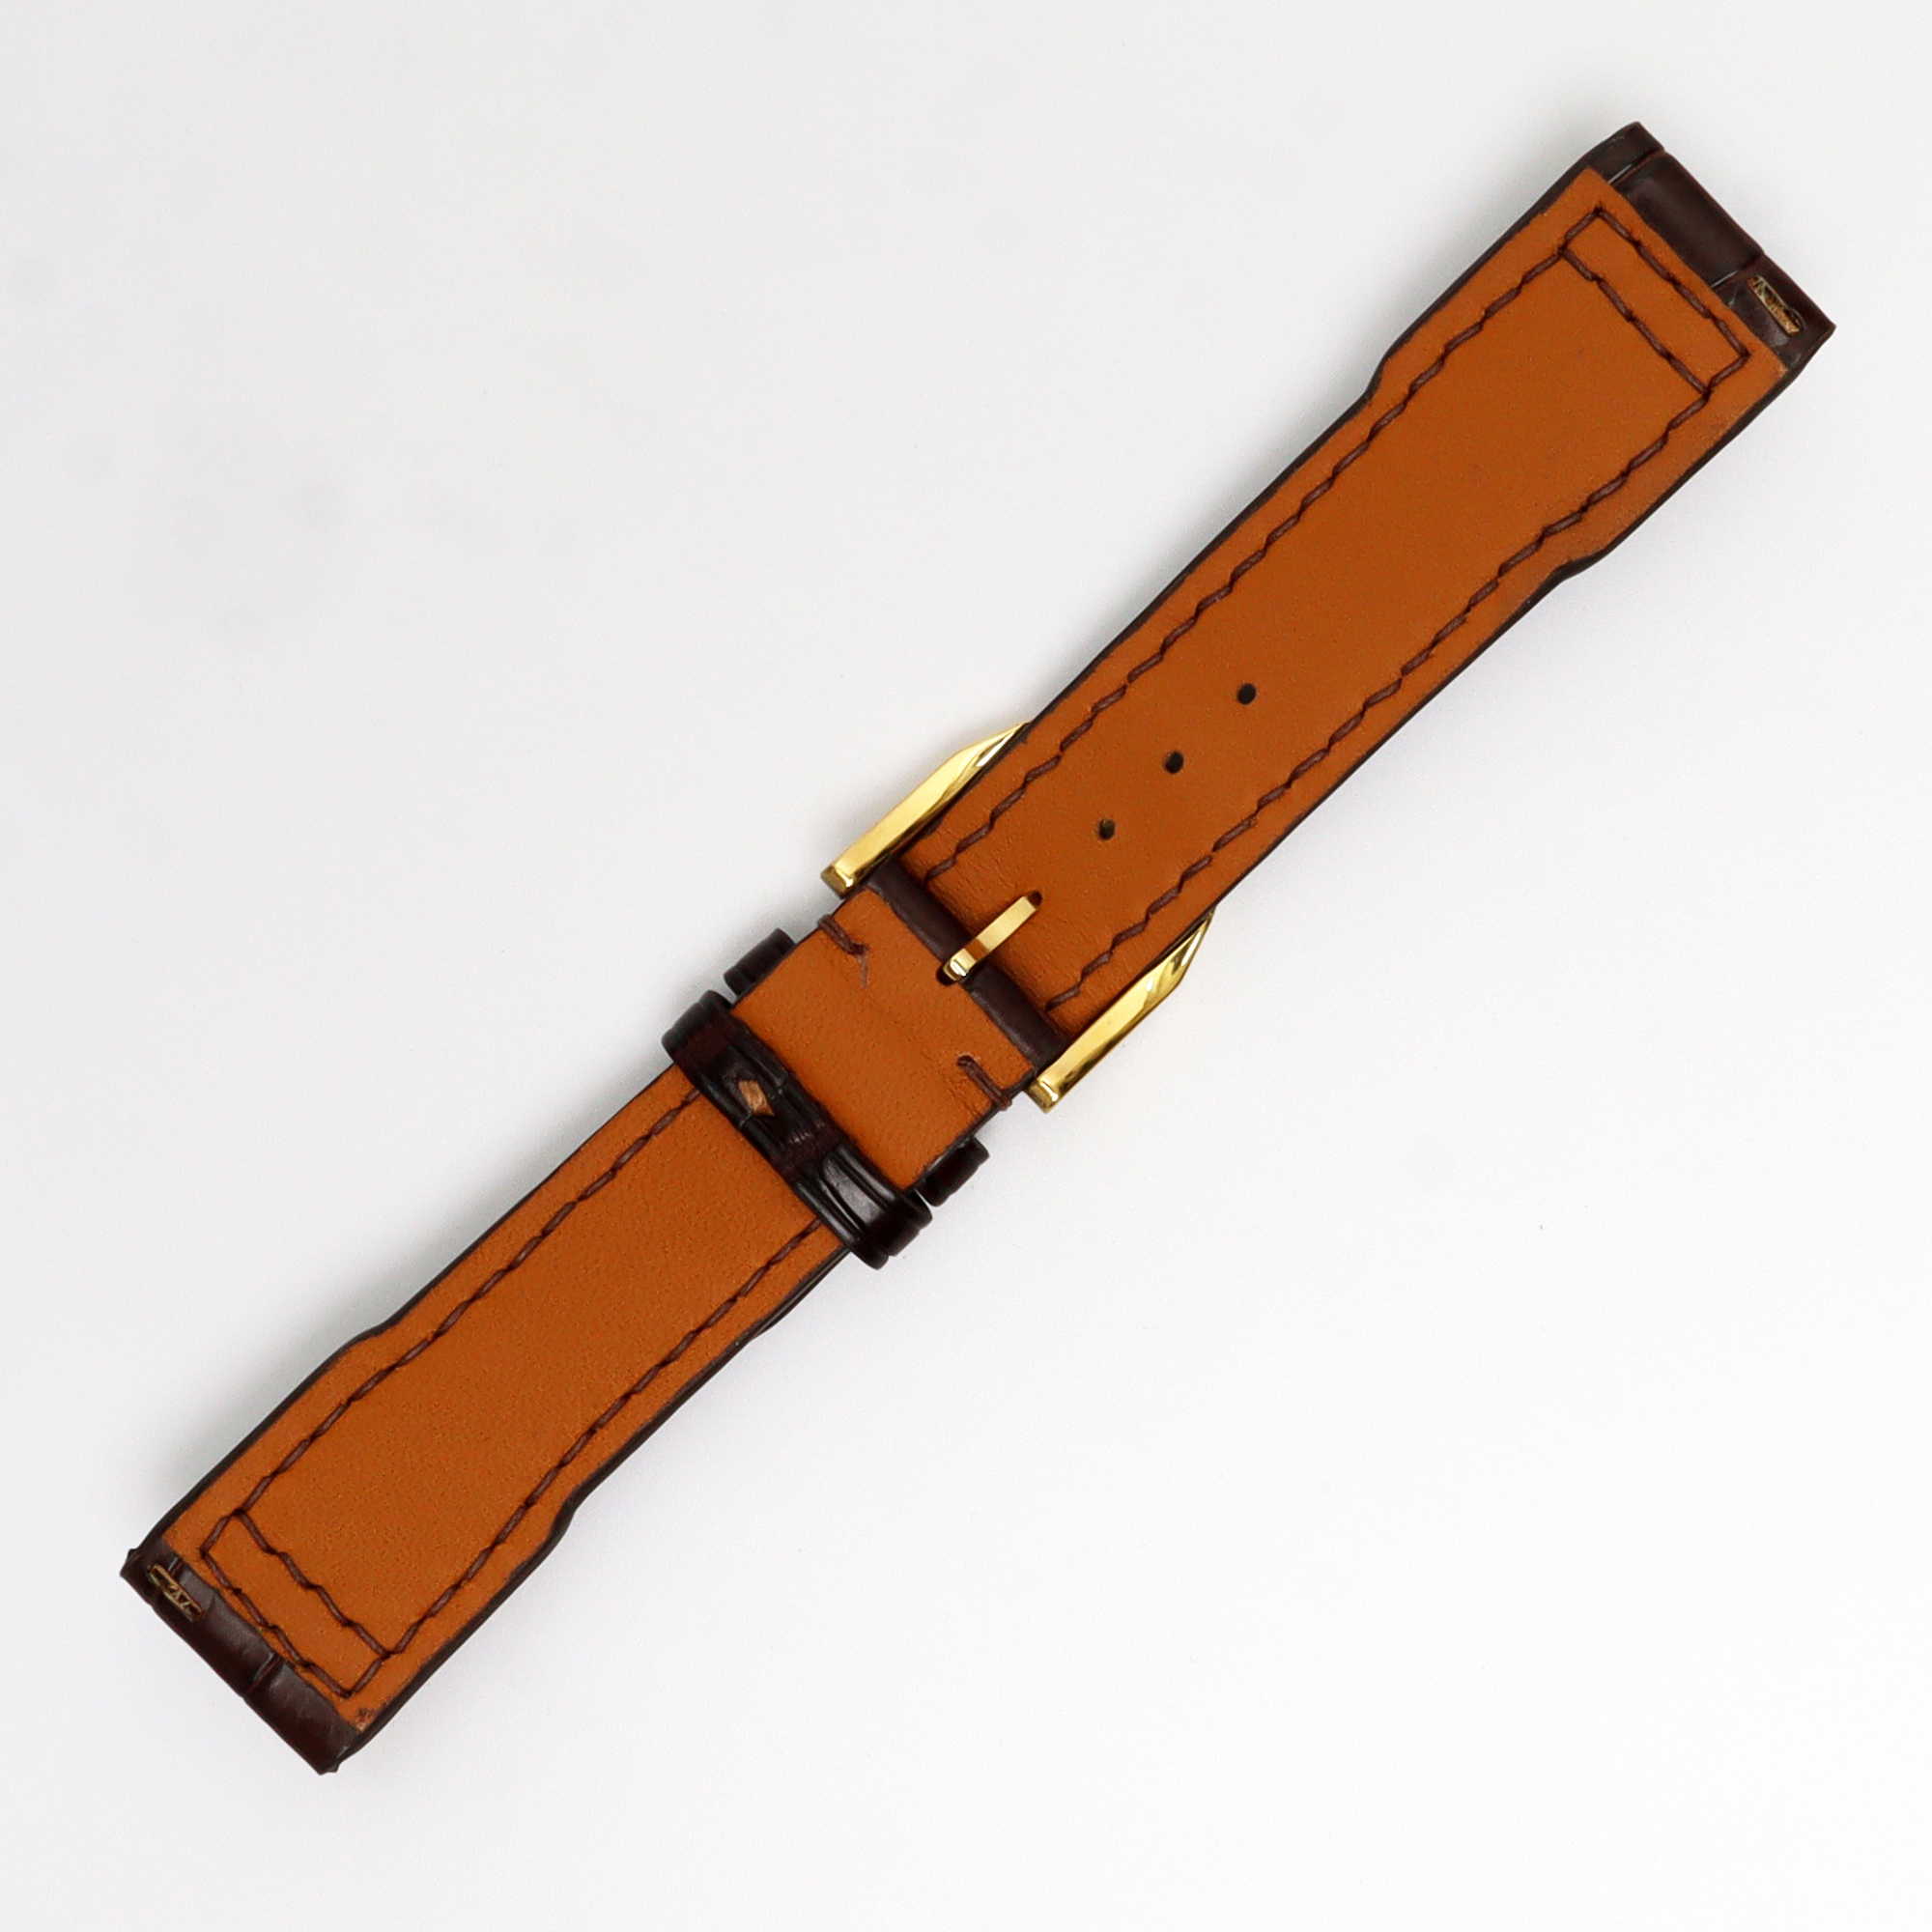 Genuine Alligator Leather Watch Straps IWC, Leather Watch Bands Quick Release Pins, Handmade Leather Watch Strap #9